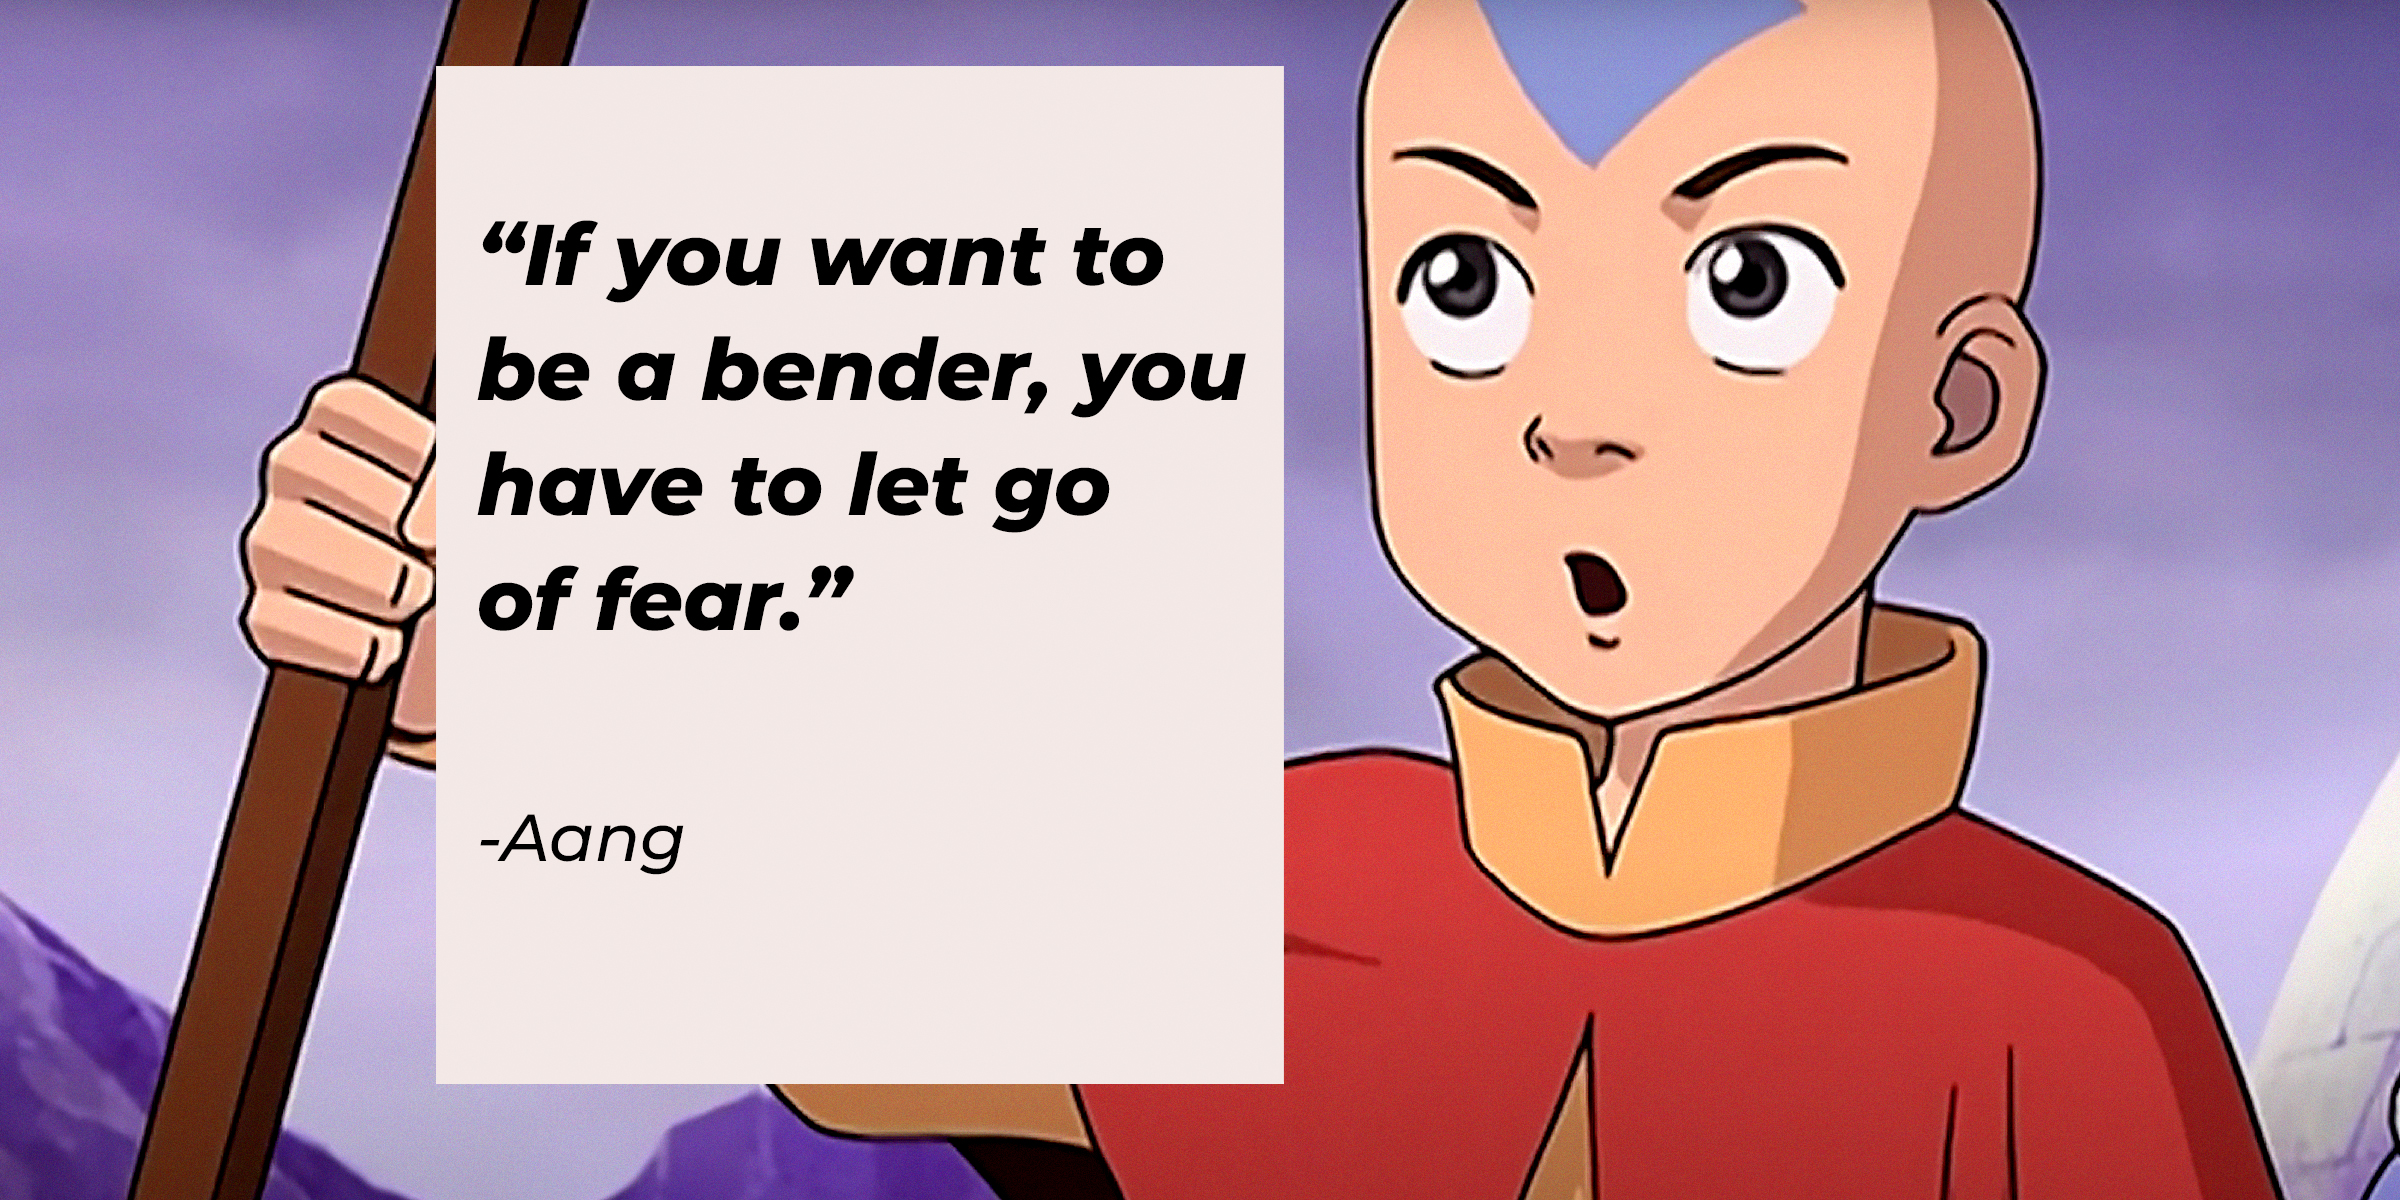 Aang's image with his quote: "If you want to be a bender, you have to let go of fear." | Source: Youtube.com/TeamAvatar